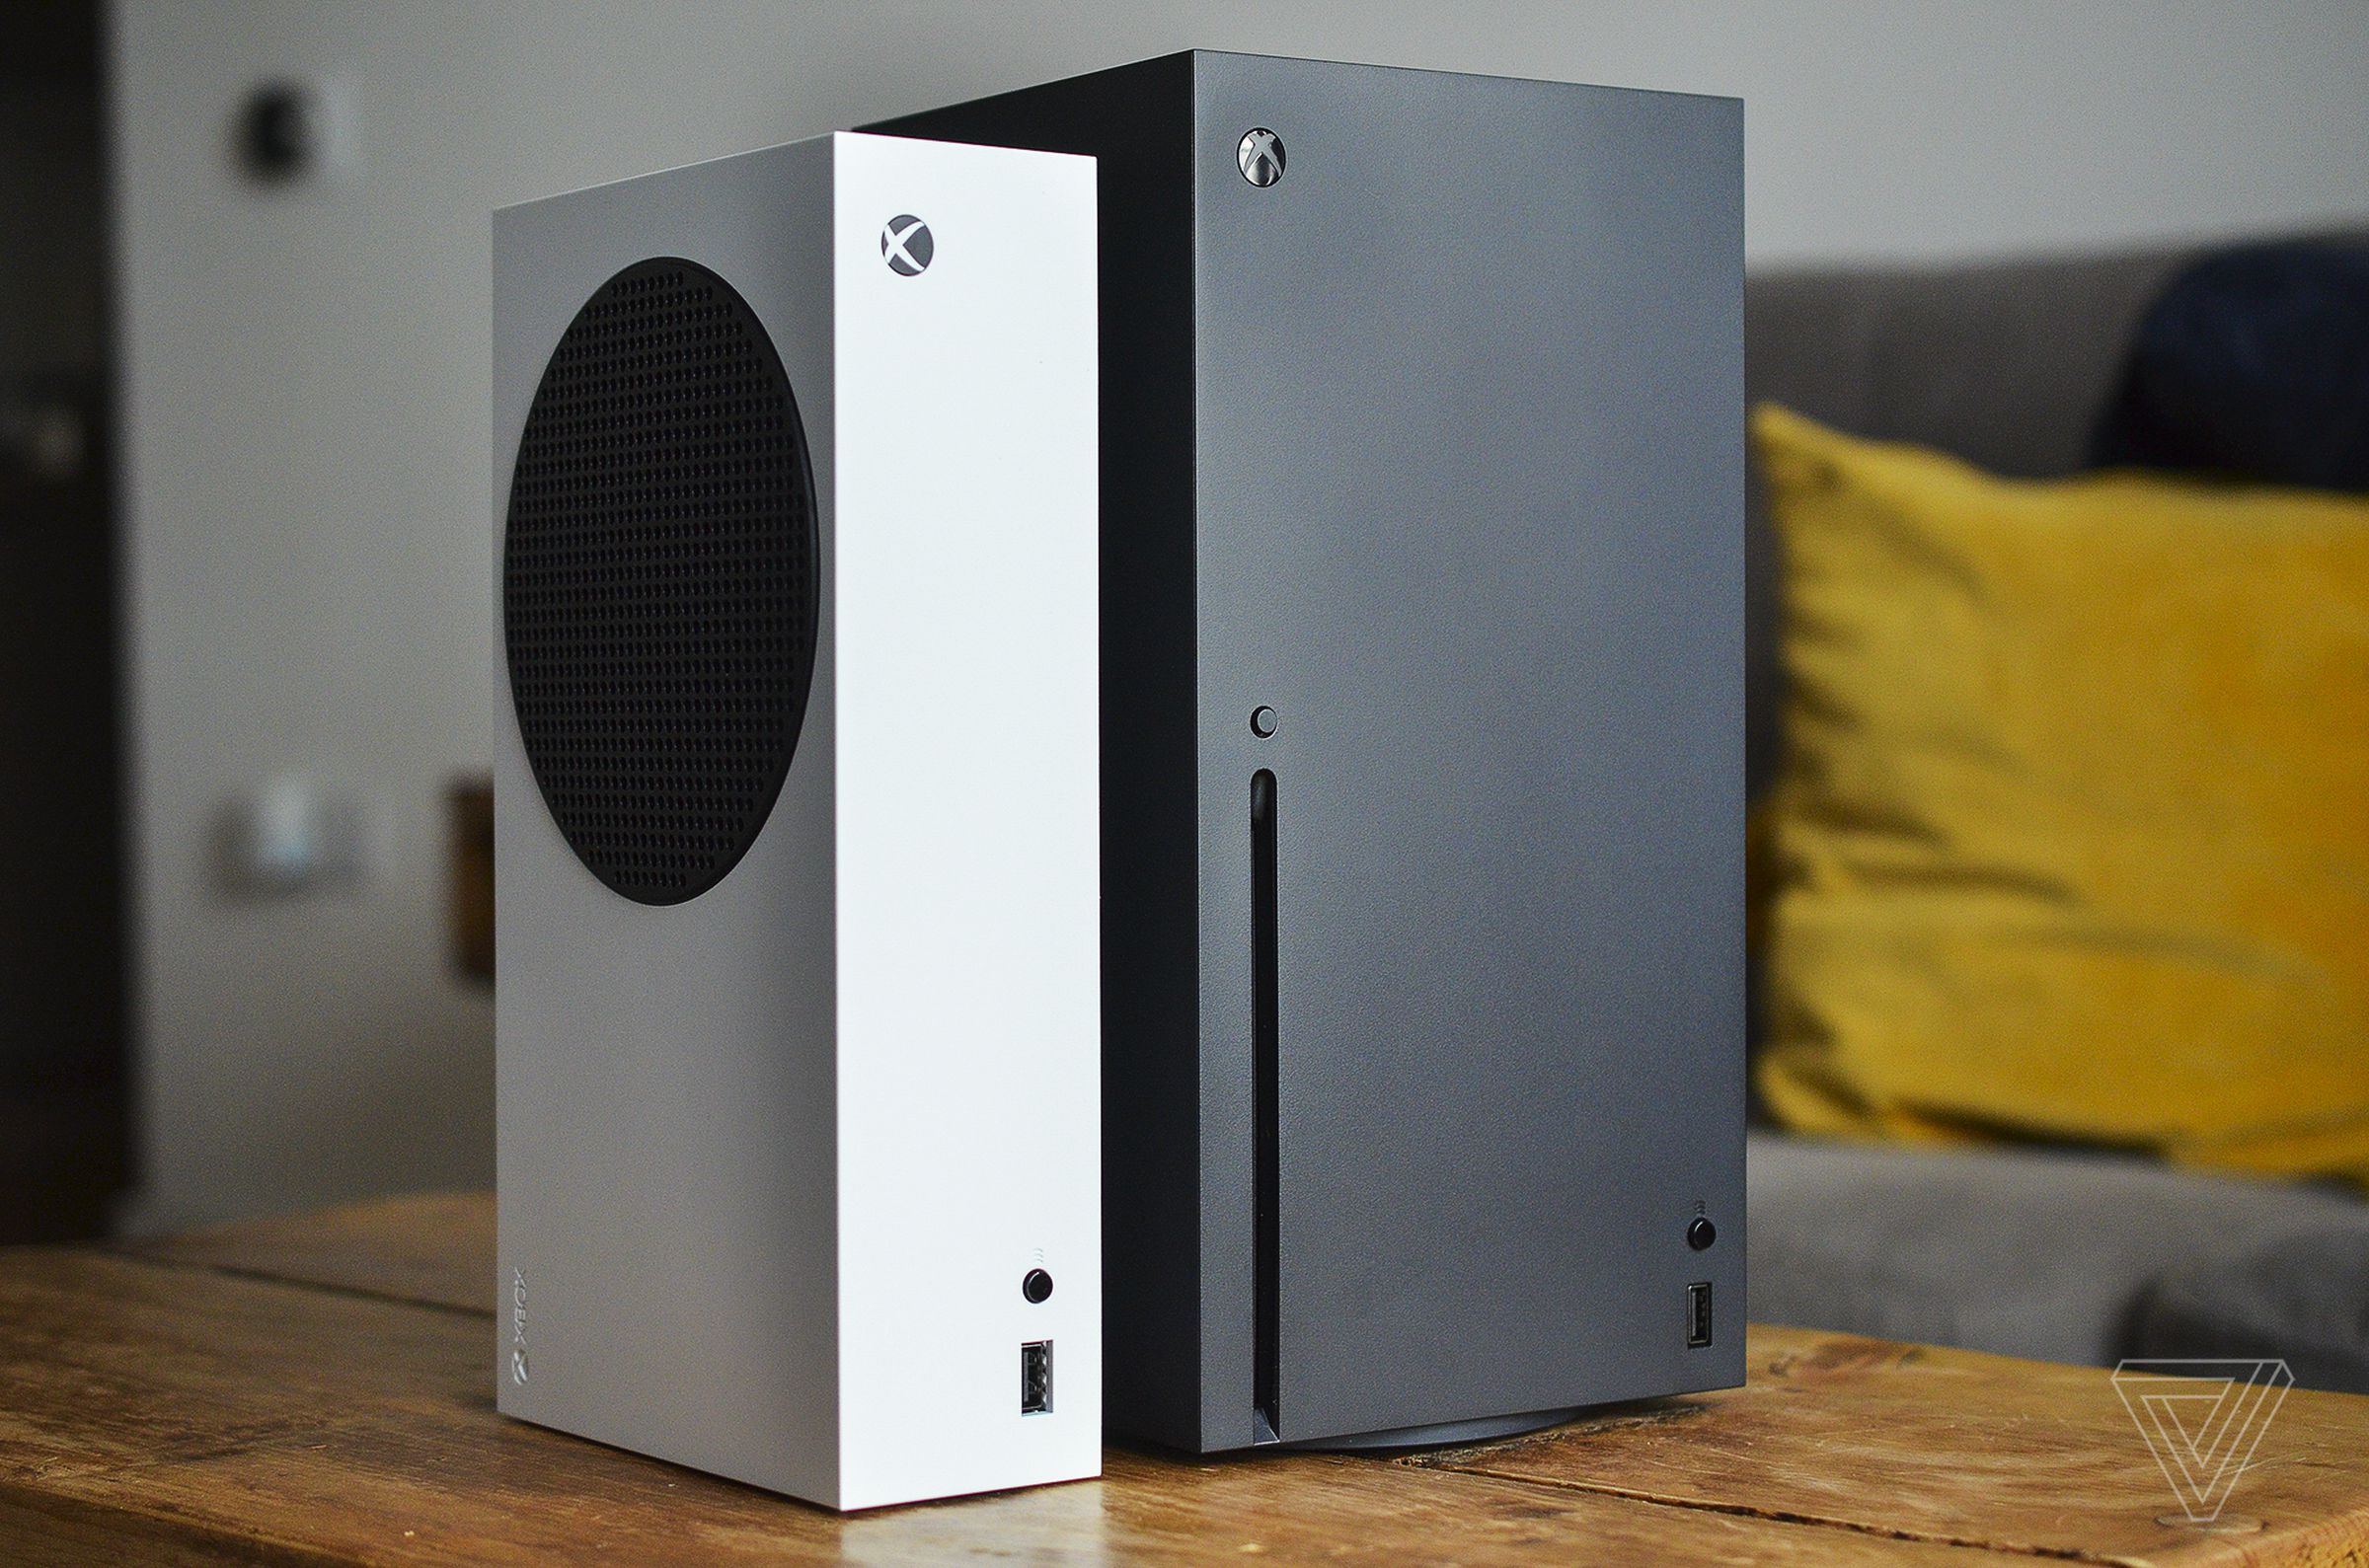 Microsoft's white Xbox Series S sits next to a larger, black Xbox Series X on a wooden coffee table in the living room.